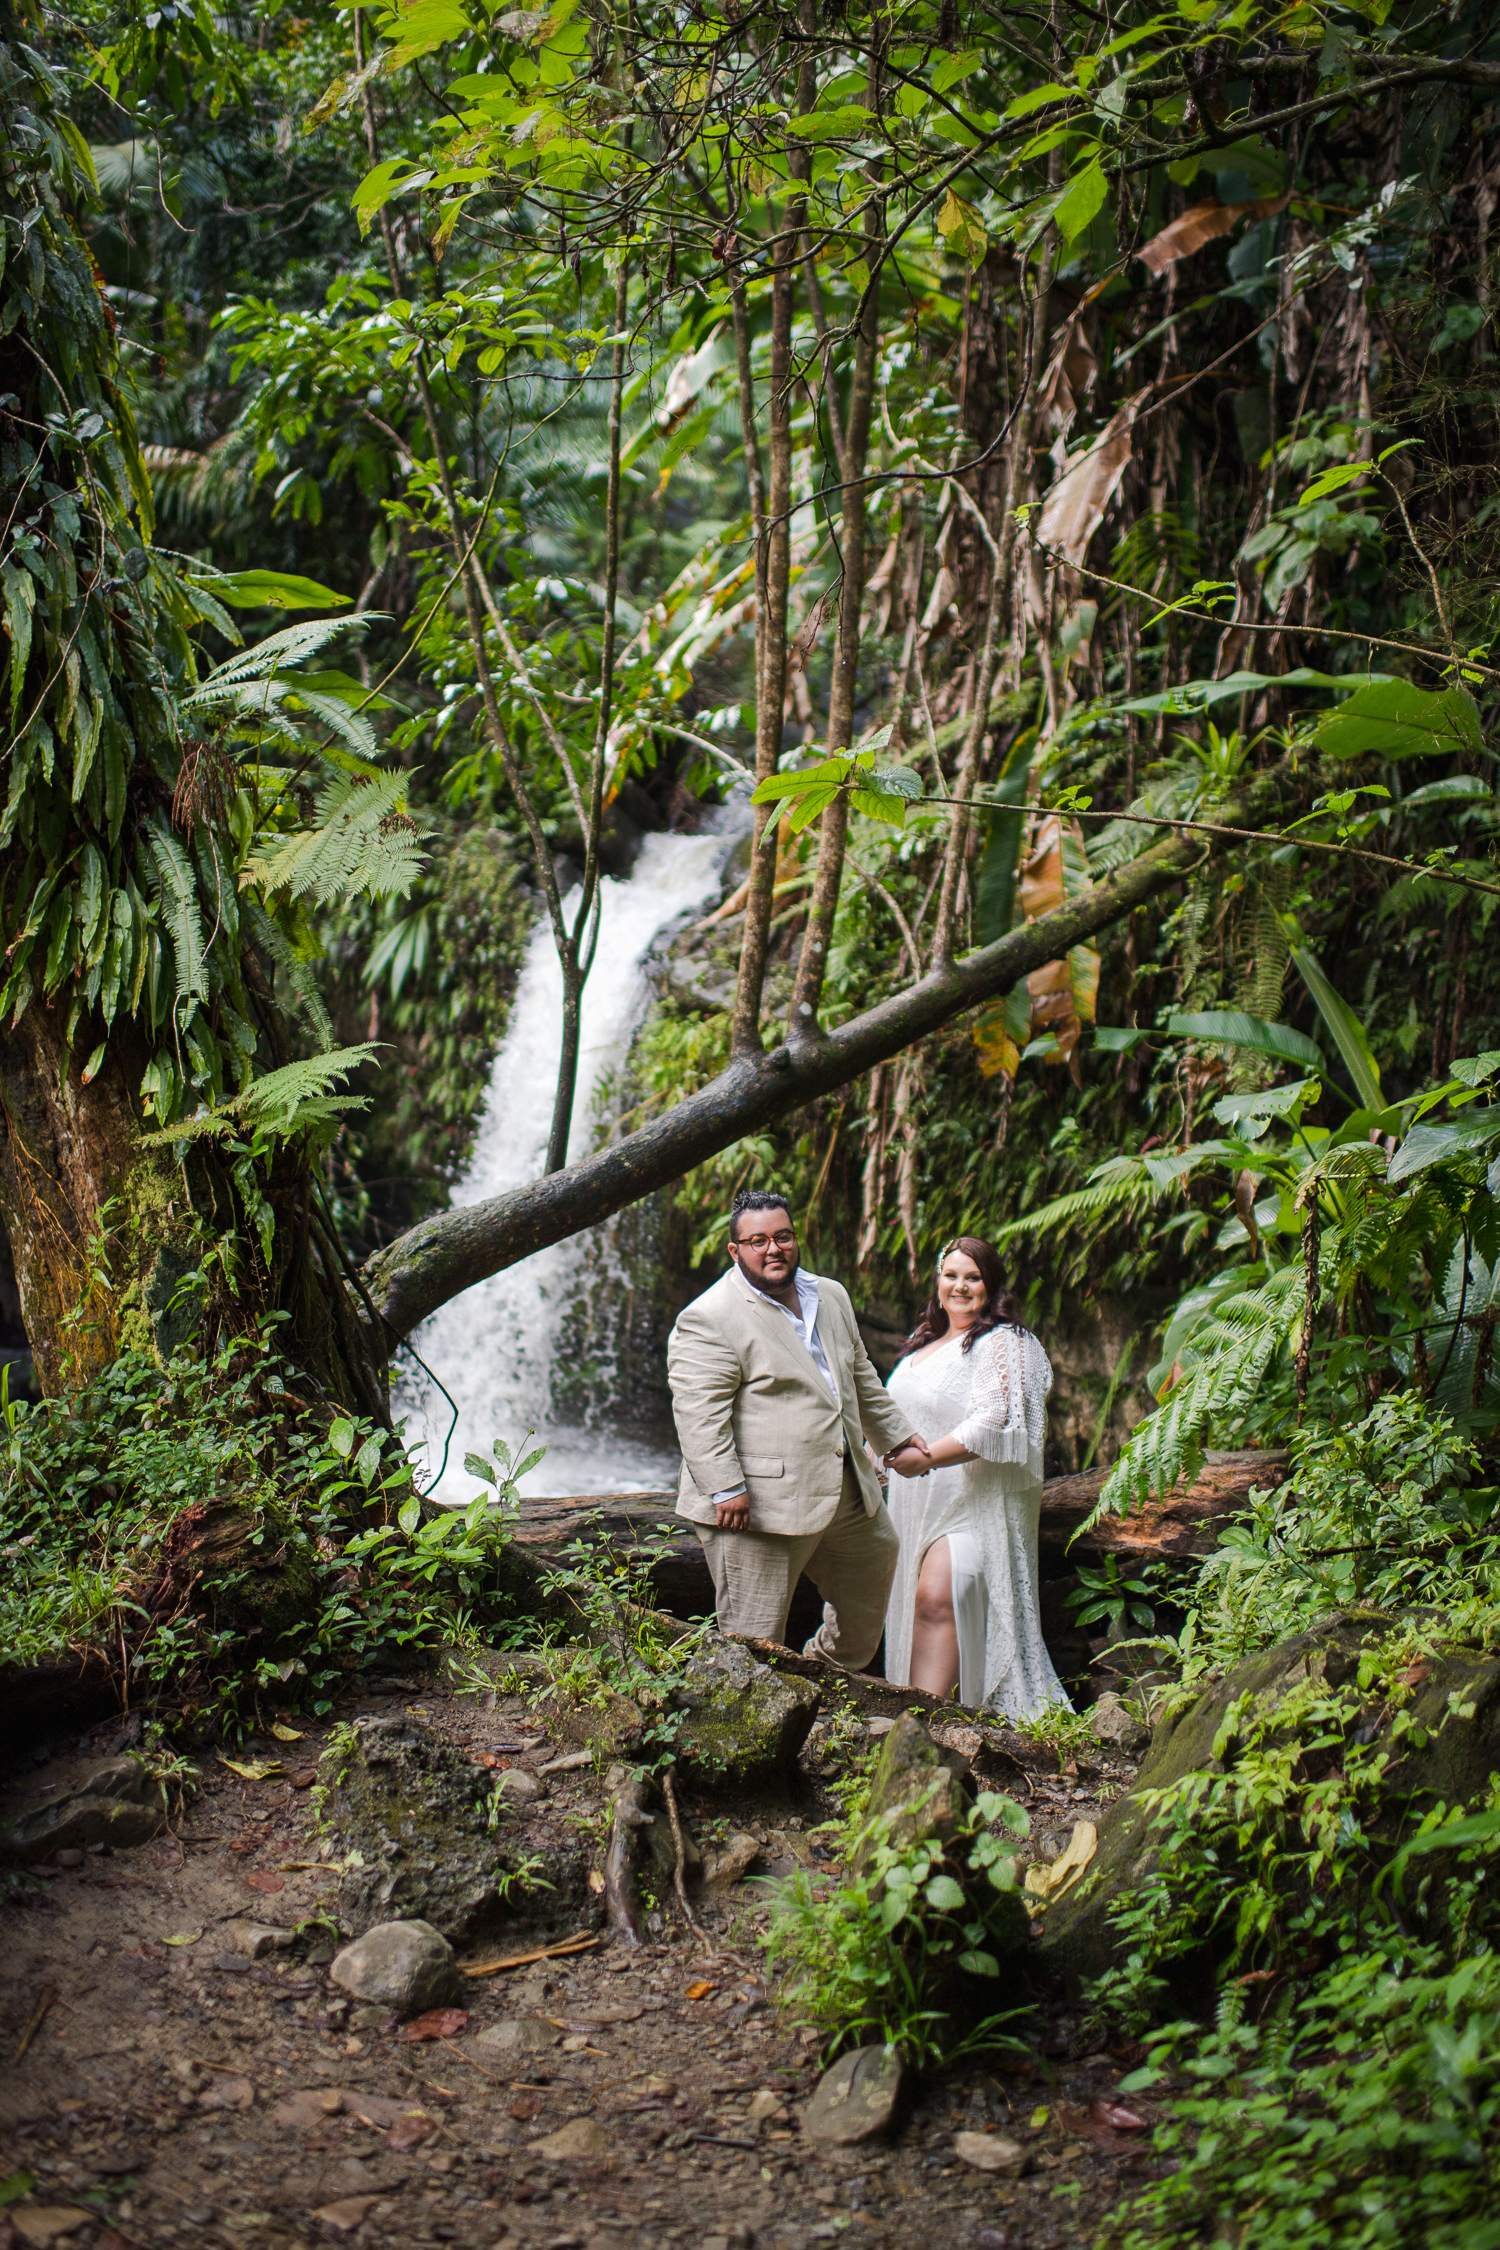 Join Stormee and Asher's romantic El Yunque Rainforest elopement in Puerto Rico. See how they exchanged vows before capturing stunning photos at Hyatt Regency.